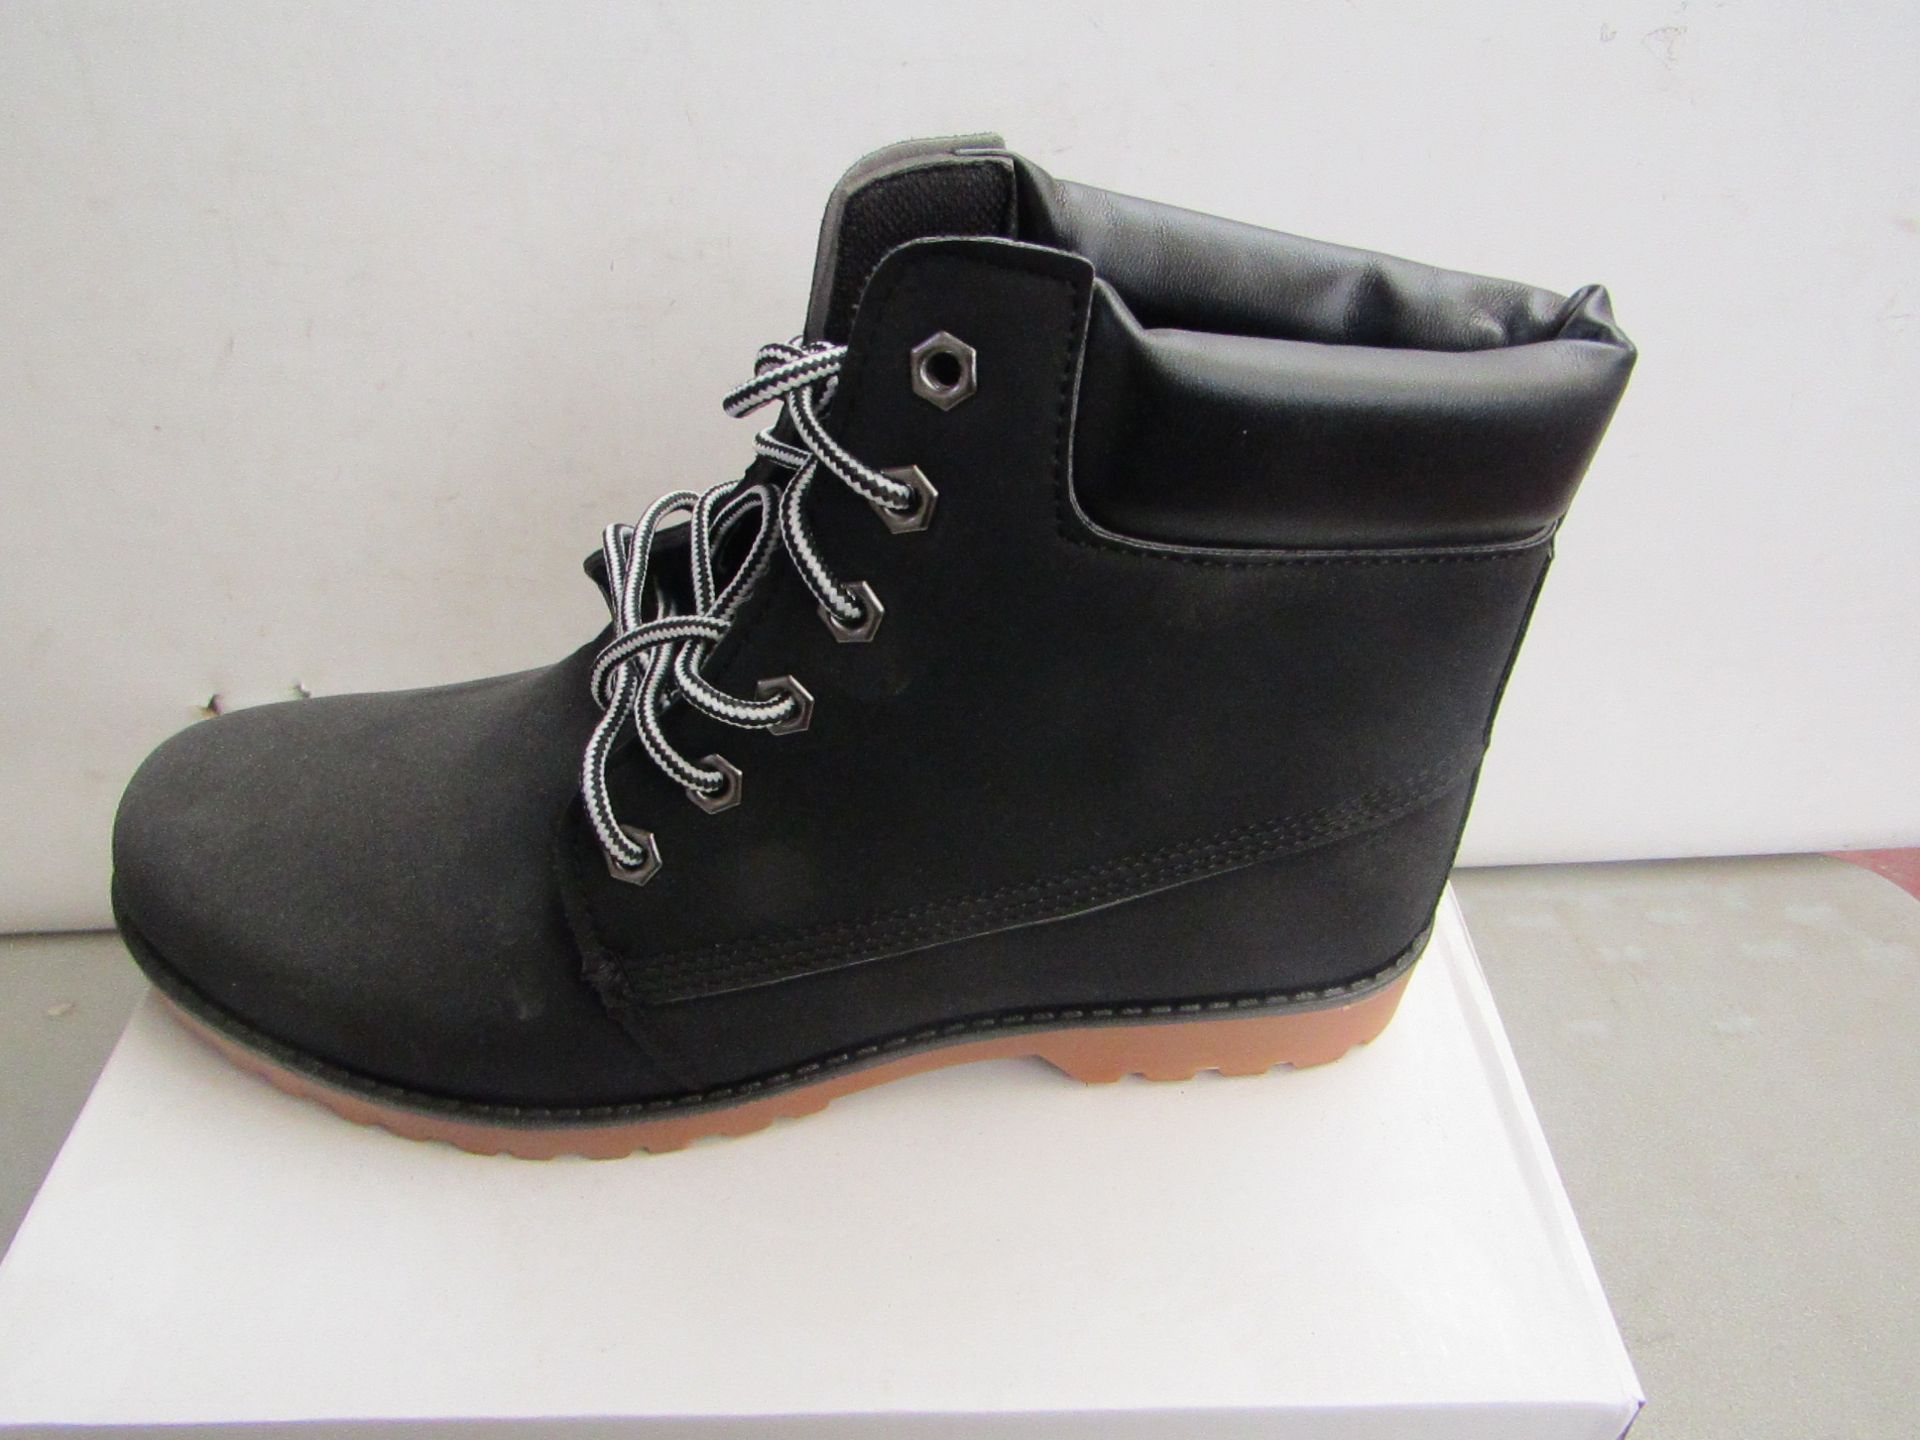 Black Fashion Boots size EU 44 new and boxed.